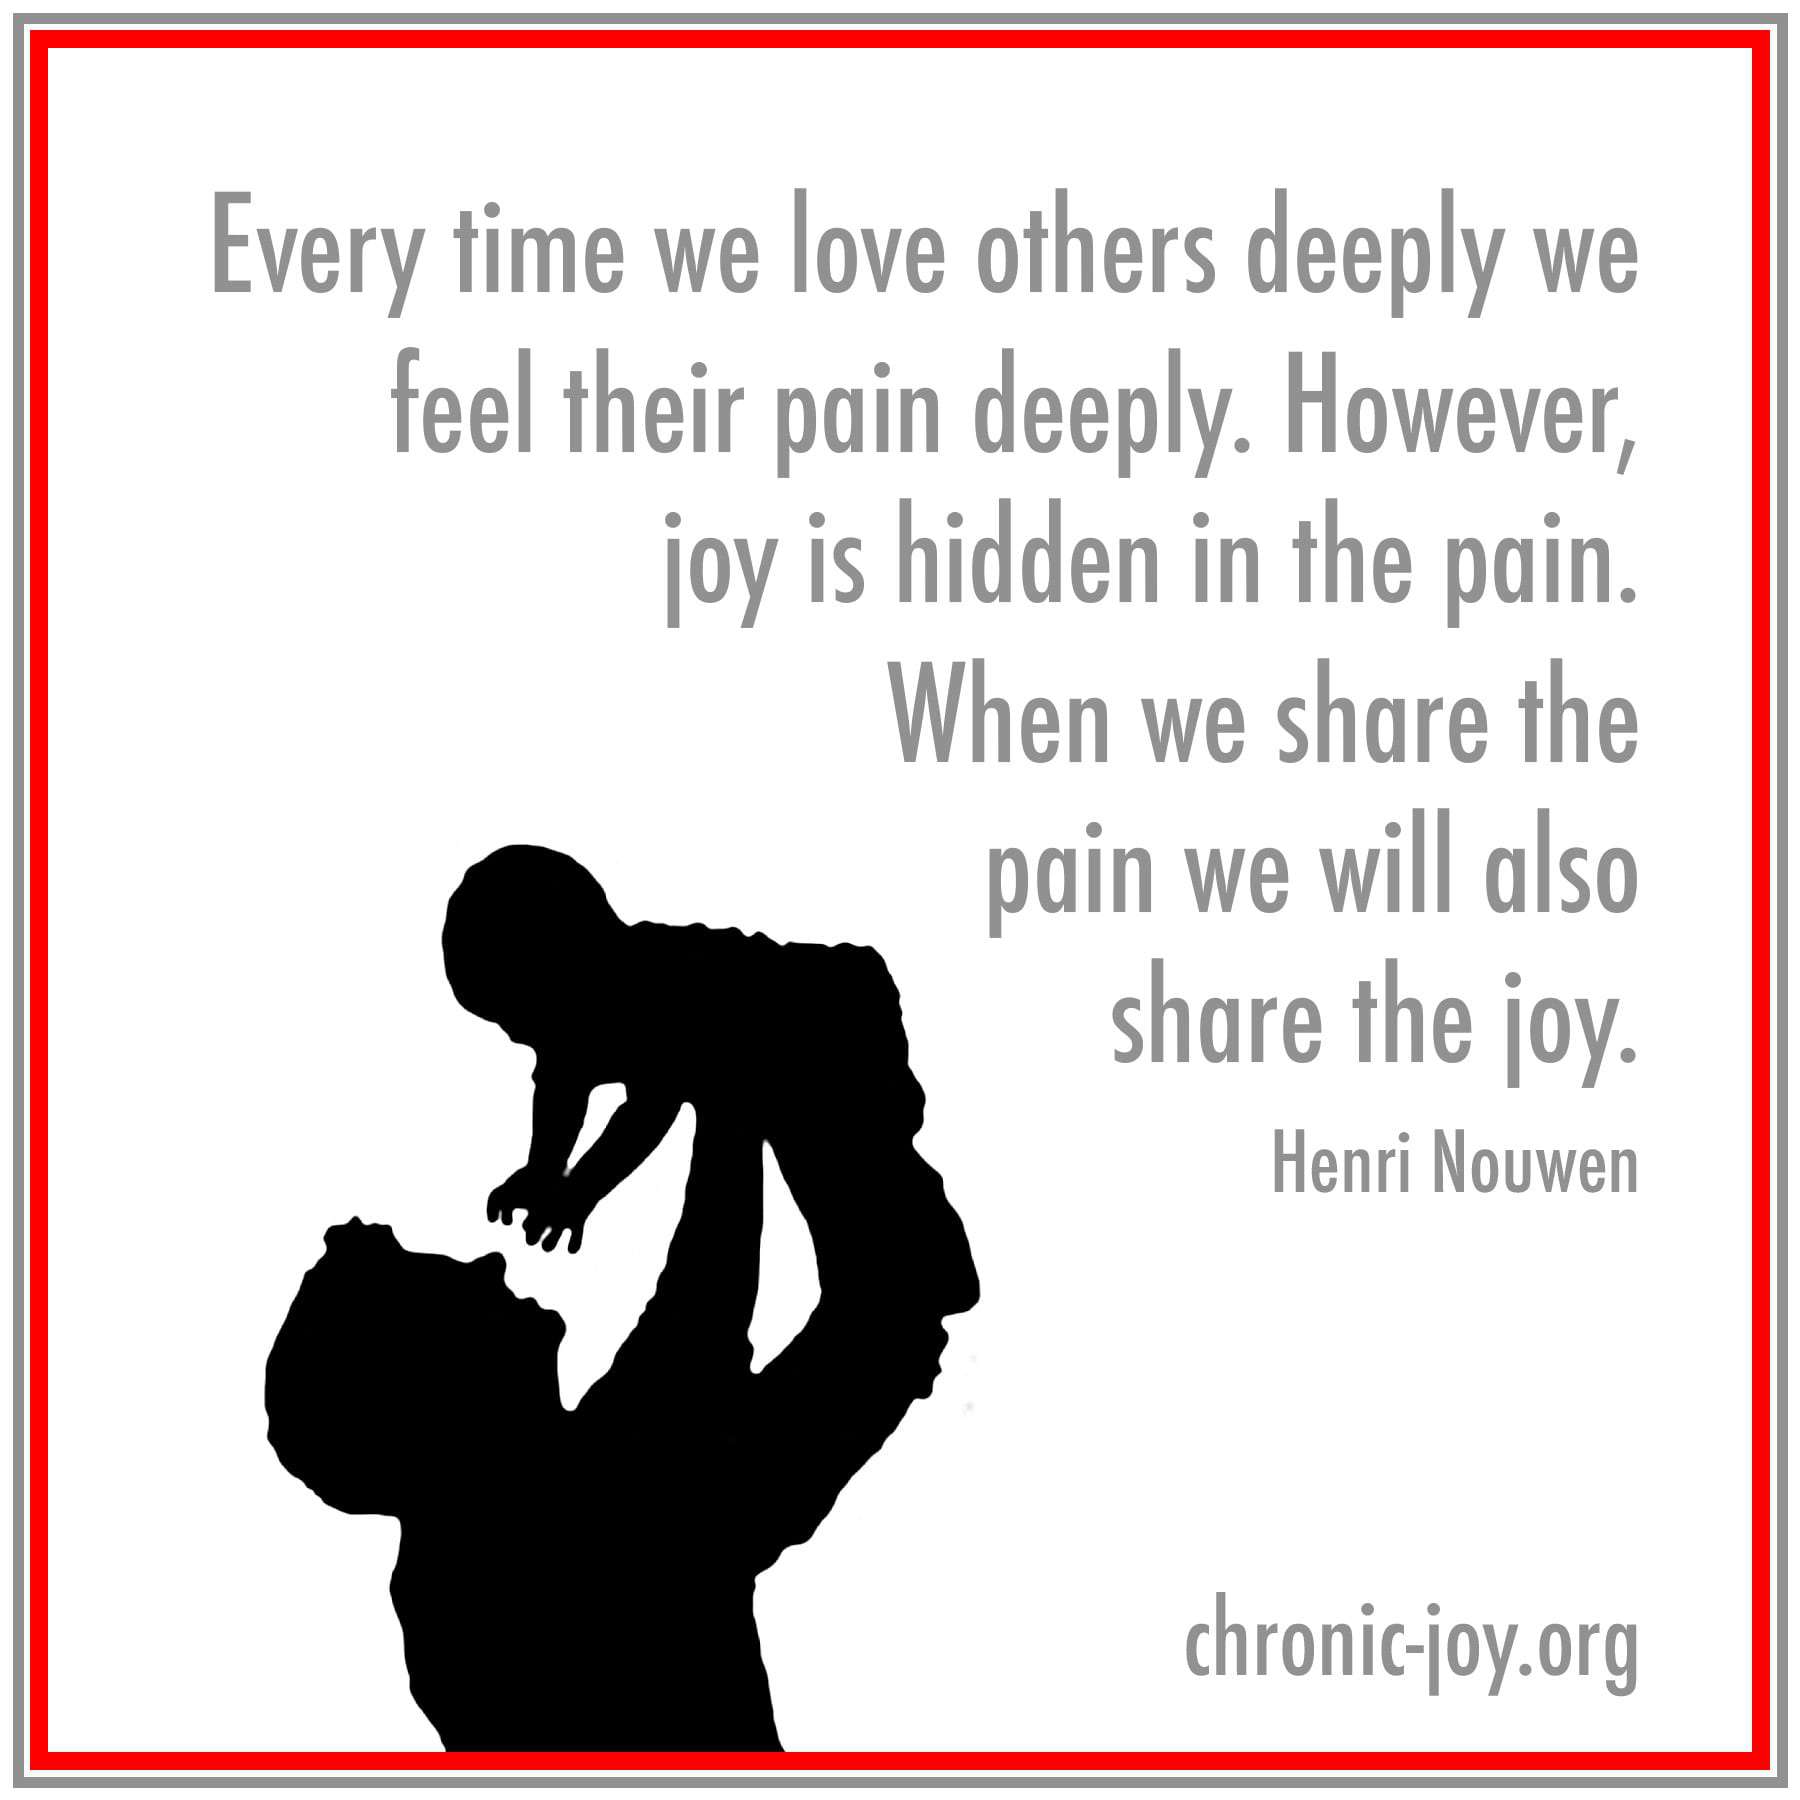 When we share the pain we will also share the joy. ~ Nouwen